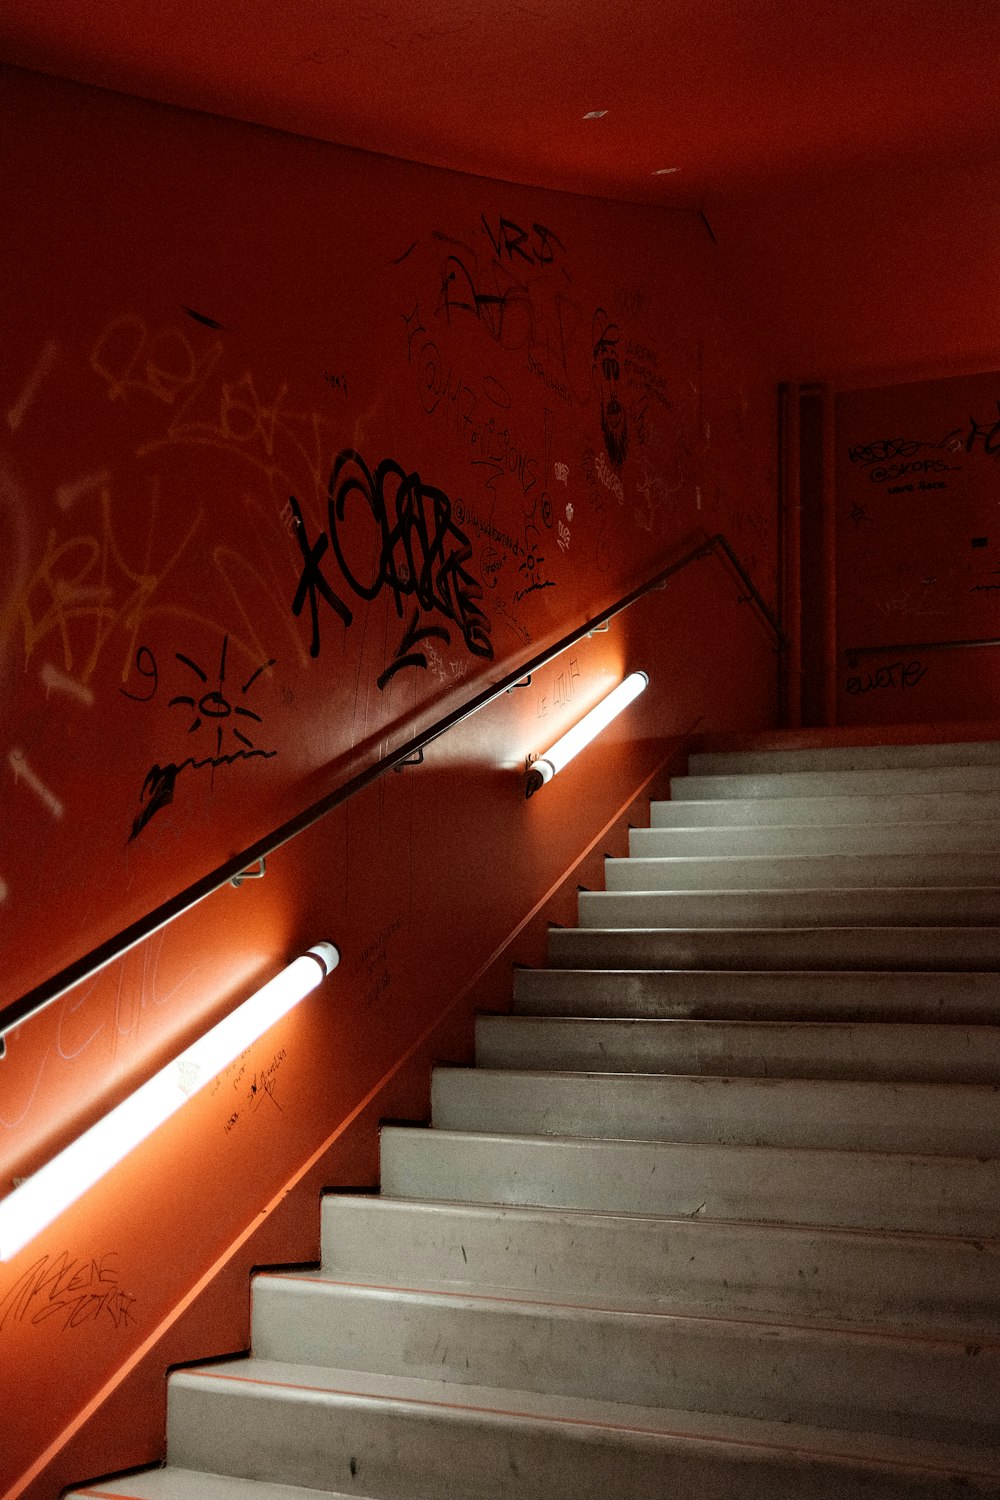 a staircase with graffiti on the wall and a light on